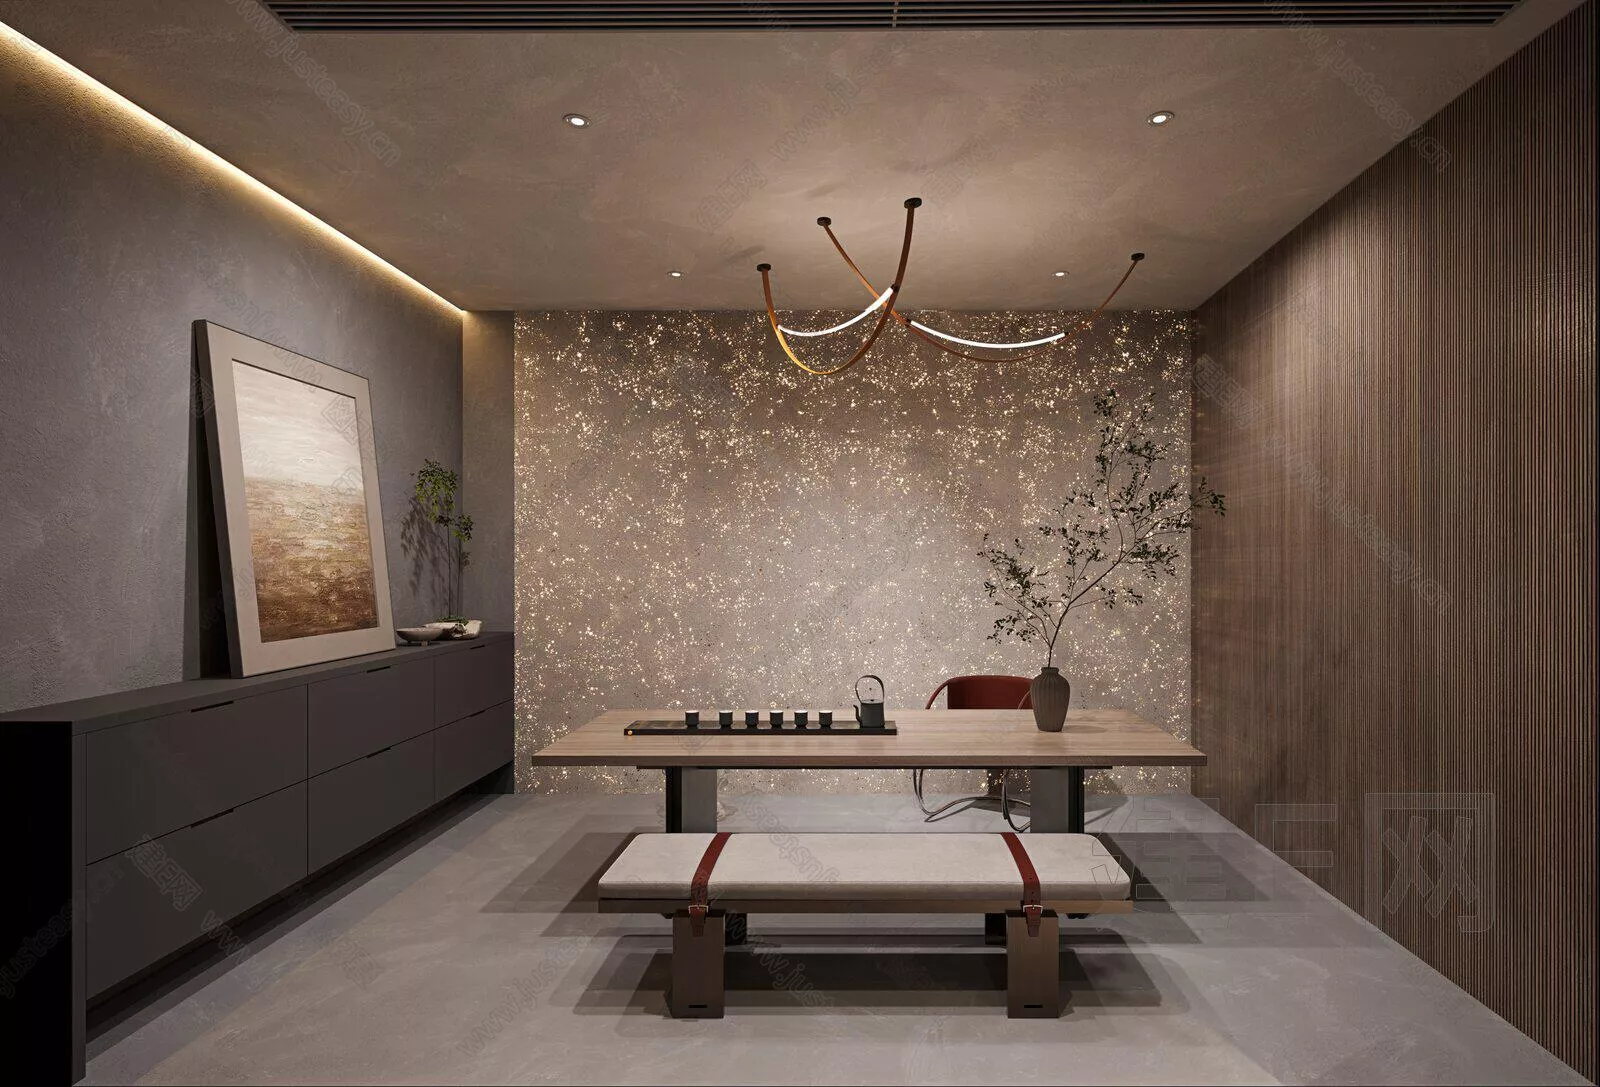 CHINESE TEAROOM - SKETCHUP 3D SCENE - ENSCAPE - 105991442